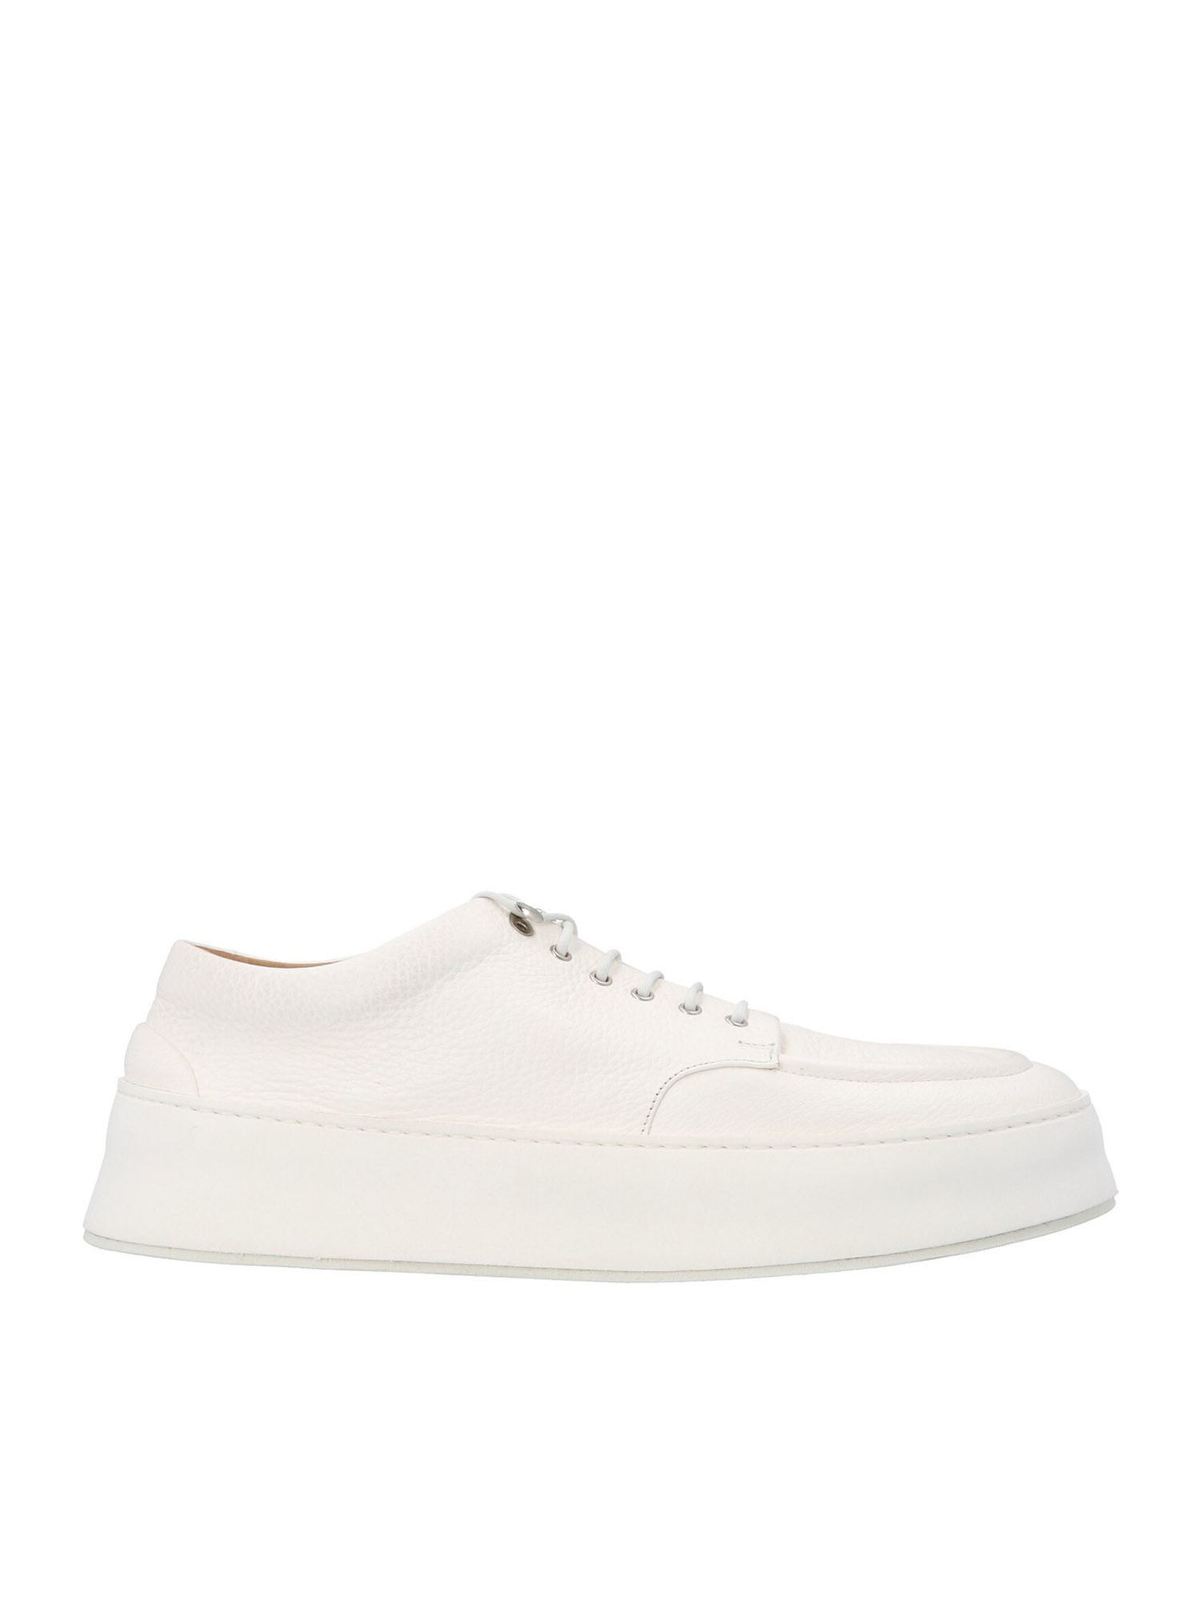 Marsèll - Cassapana derby sneakers in white - trainers - MM4130188110